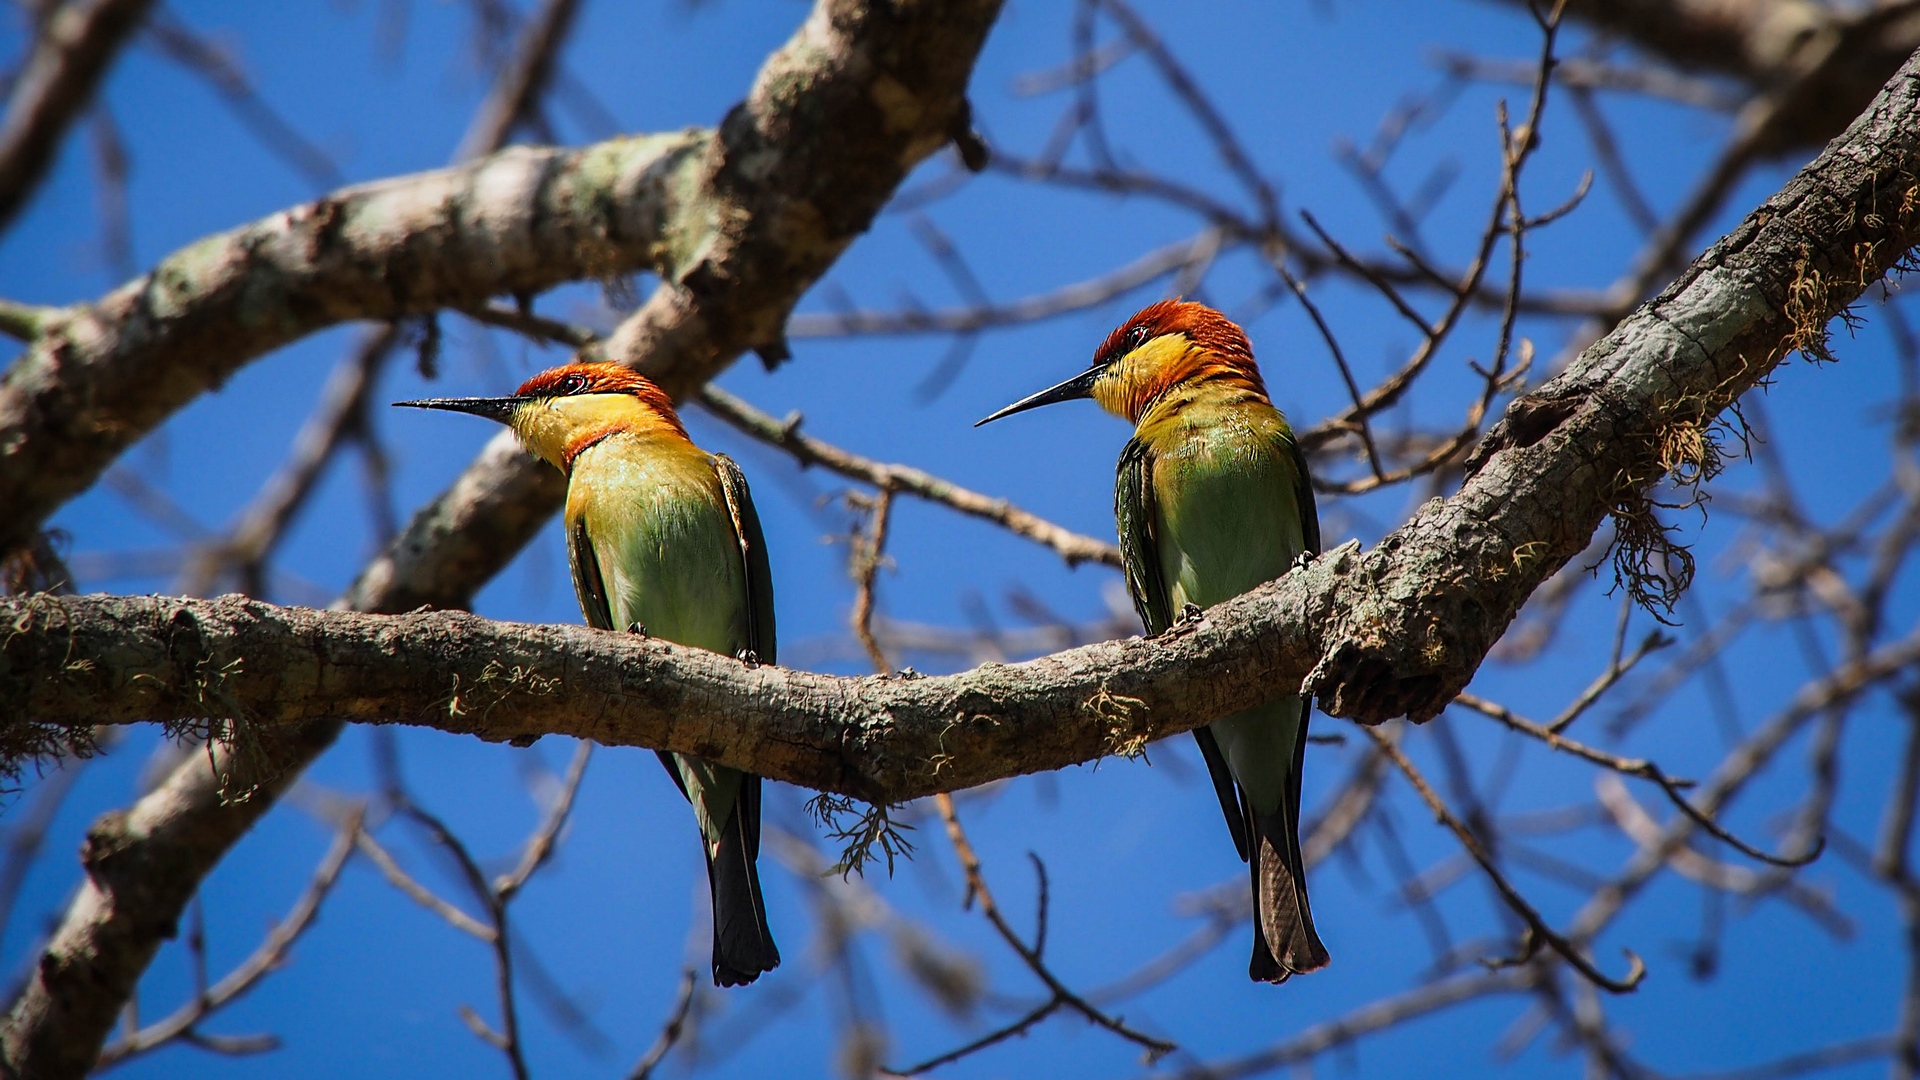 General 1920x1080 birds nature animals branch bee-eaters